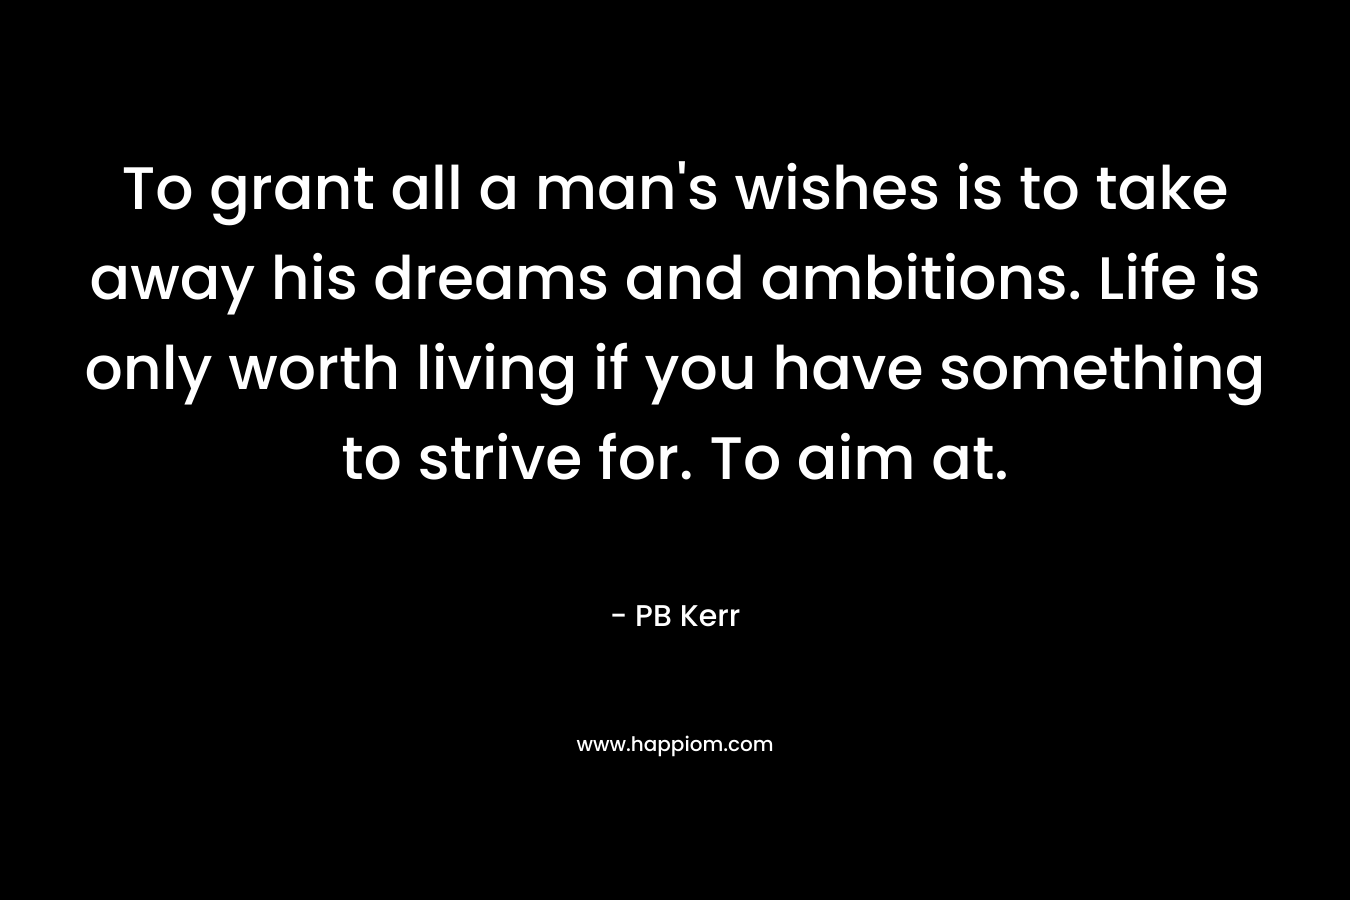 To grant all a man's wishes is to take away his dreams and ambitions. Life is only worth living if you have something to strive for. To aim at.